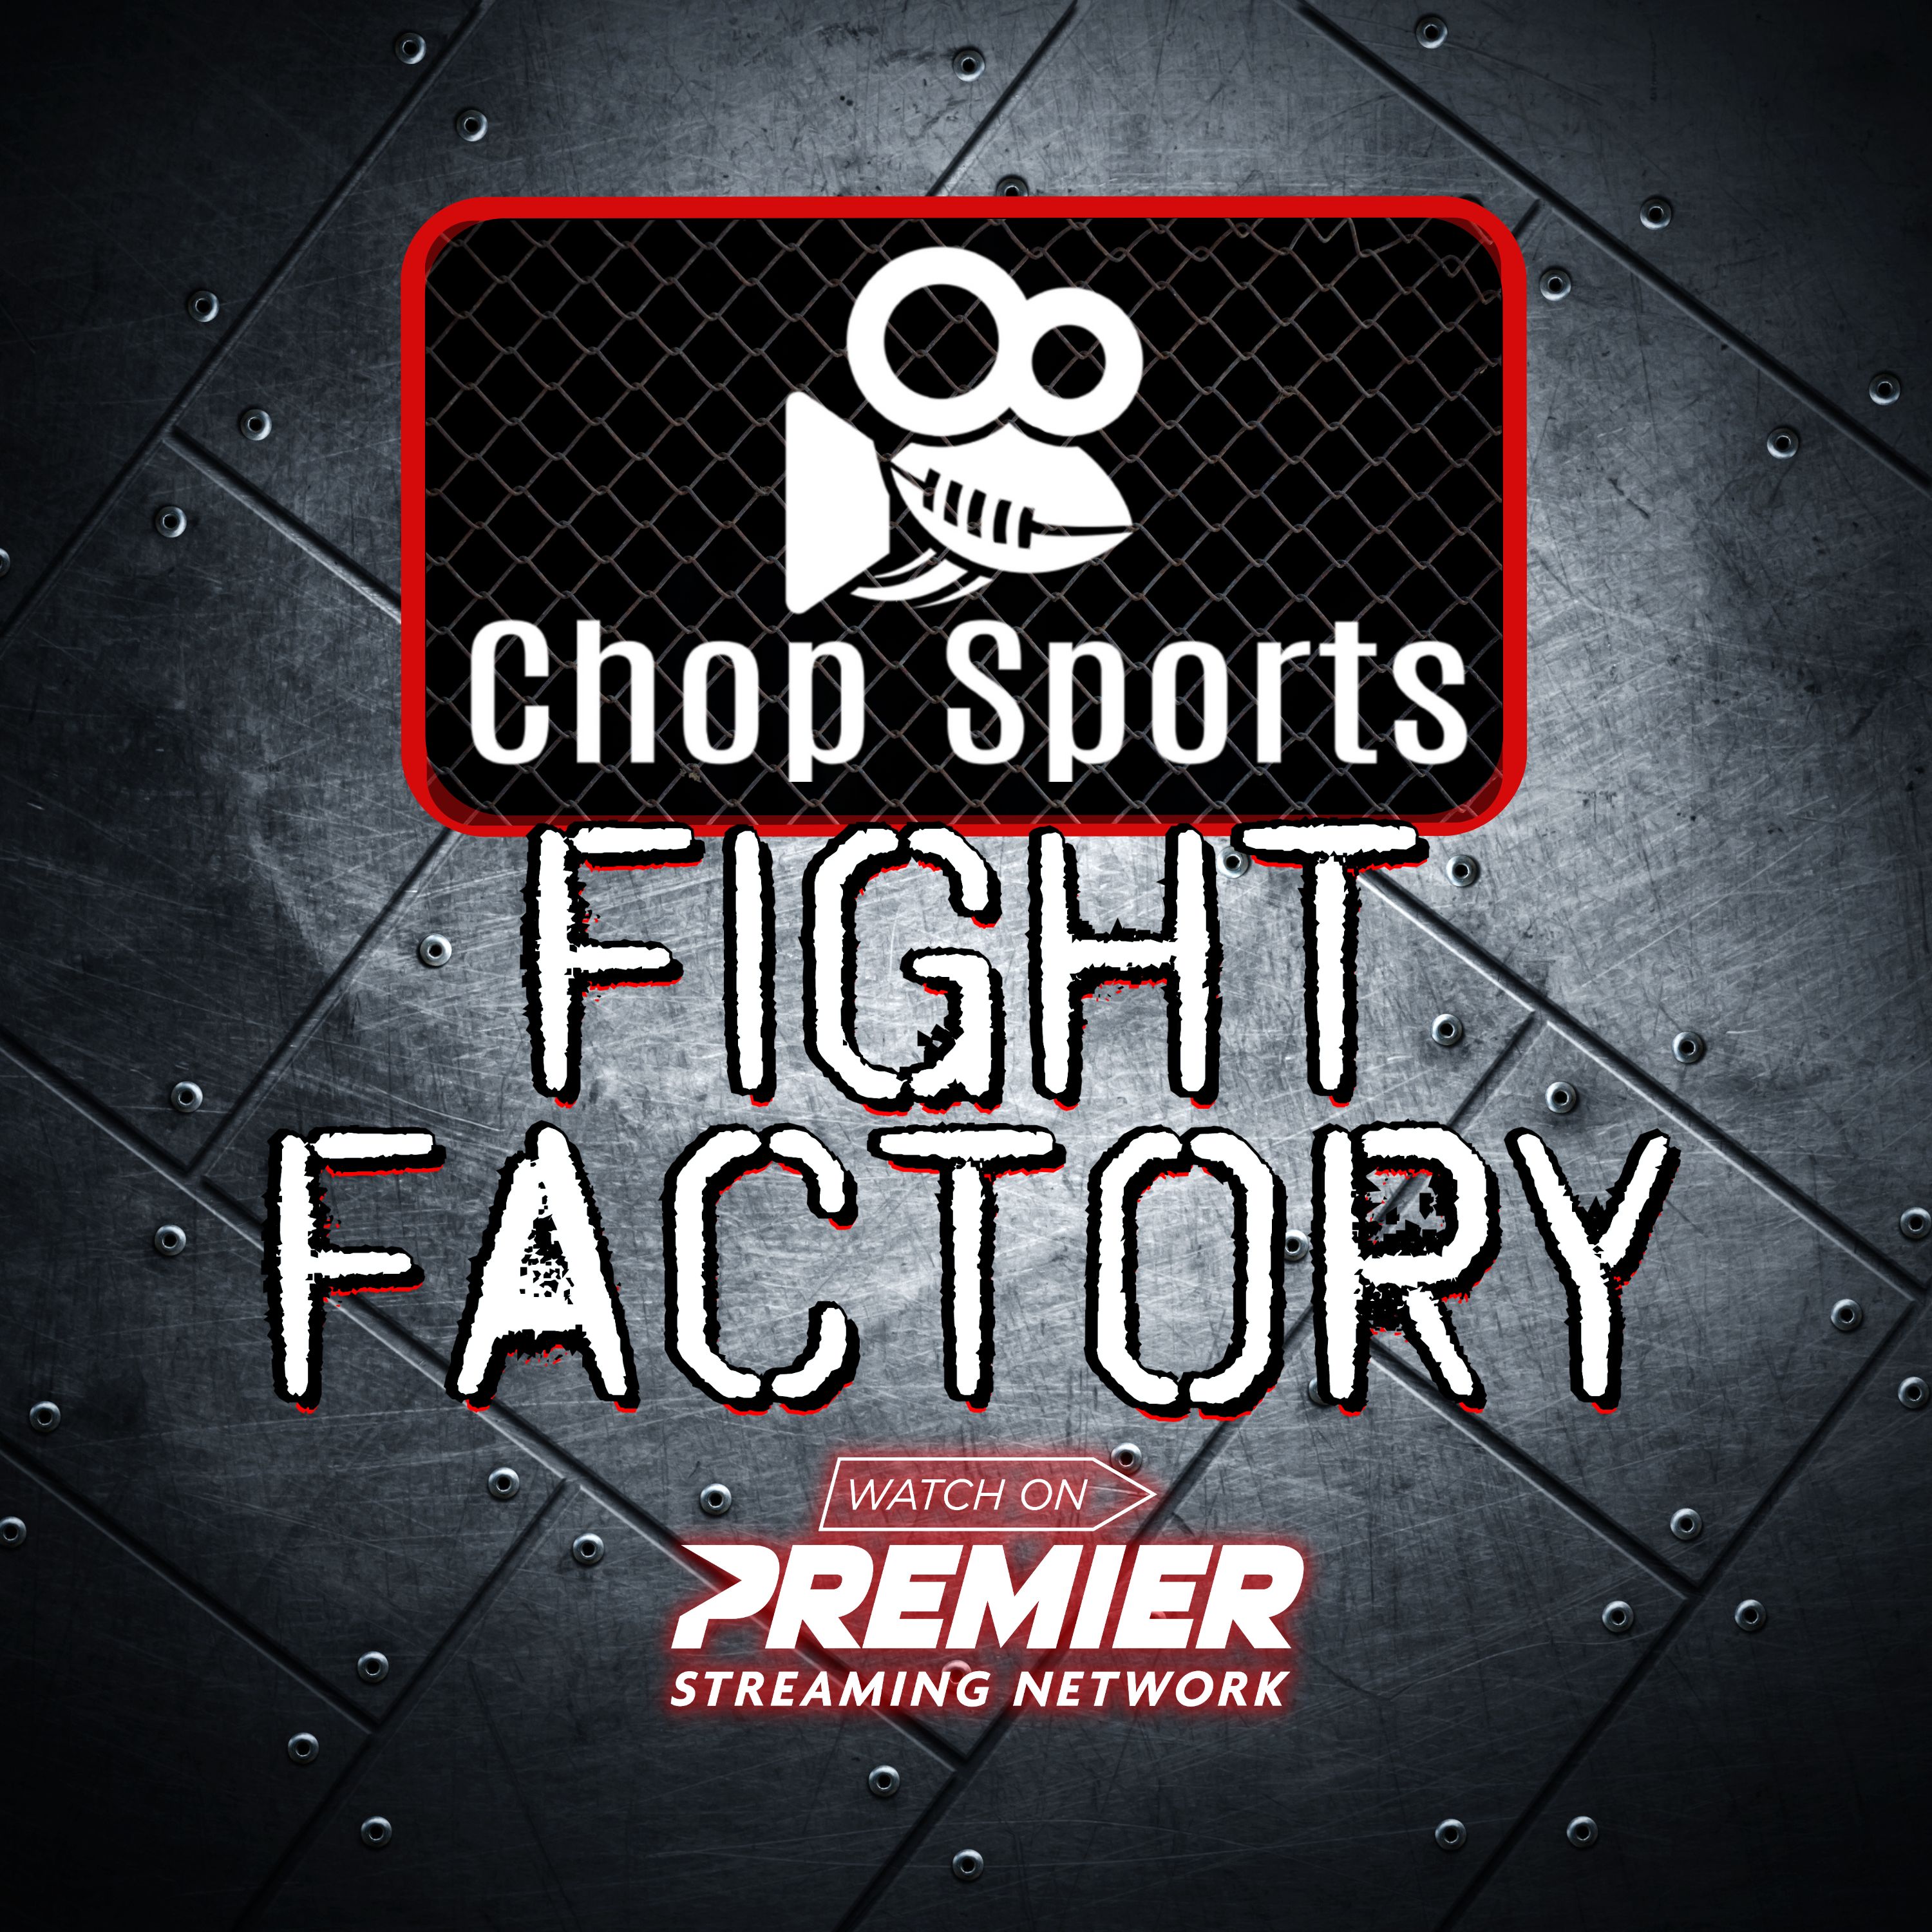 Show artwork for Chop Sports Fight Factory